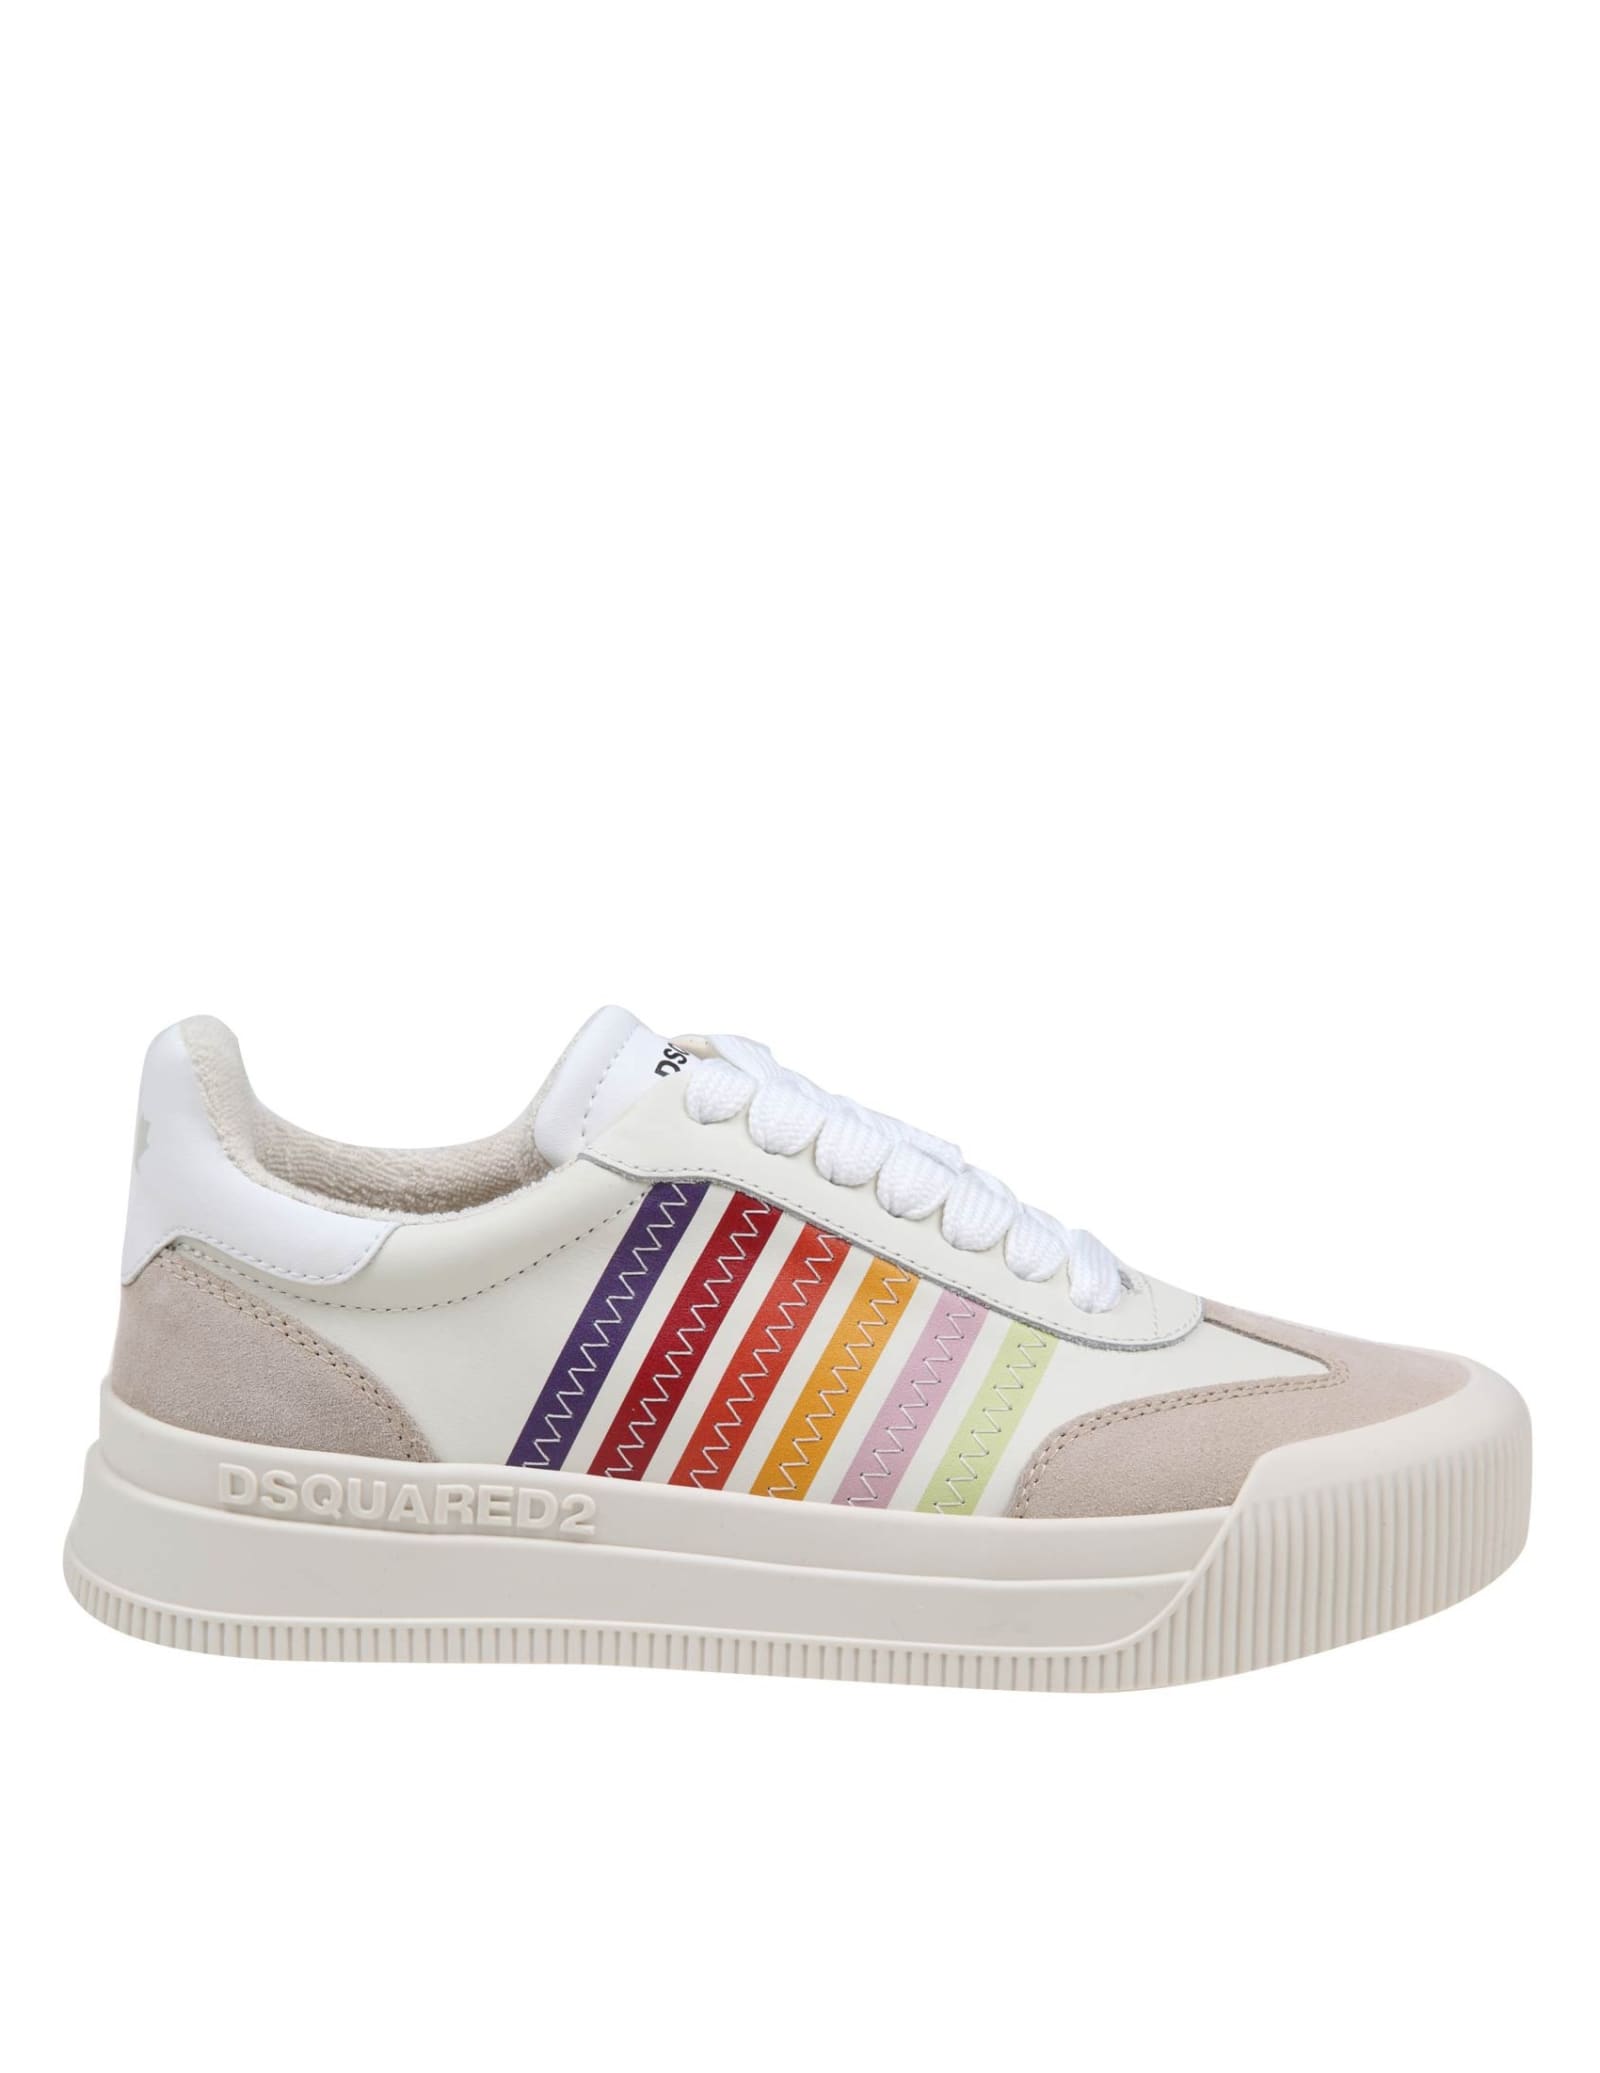 New Jersey Sneakers In Cream Color Leather